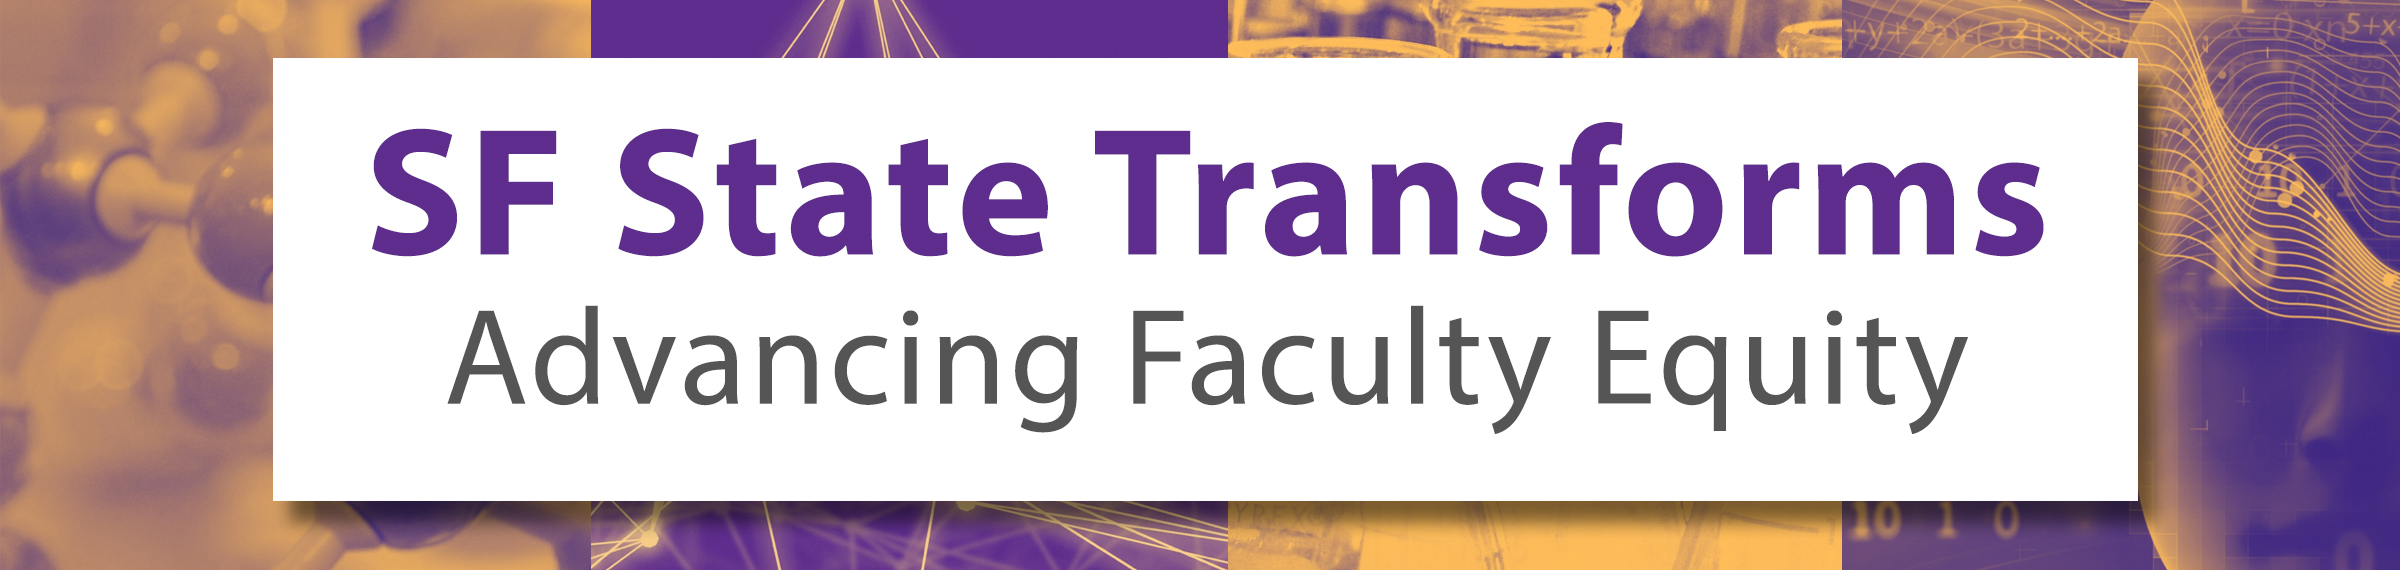 A purple and gold banner that reads: SF State Transforms Advancing Faculty Equity